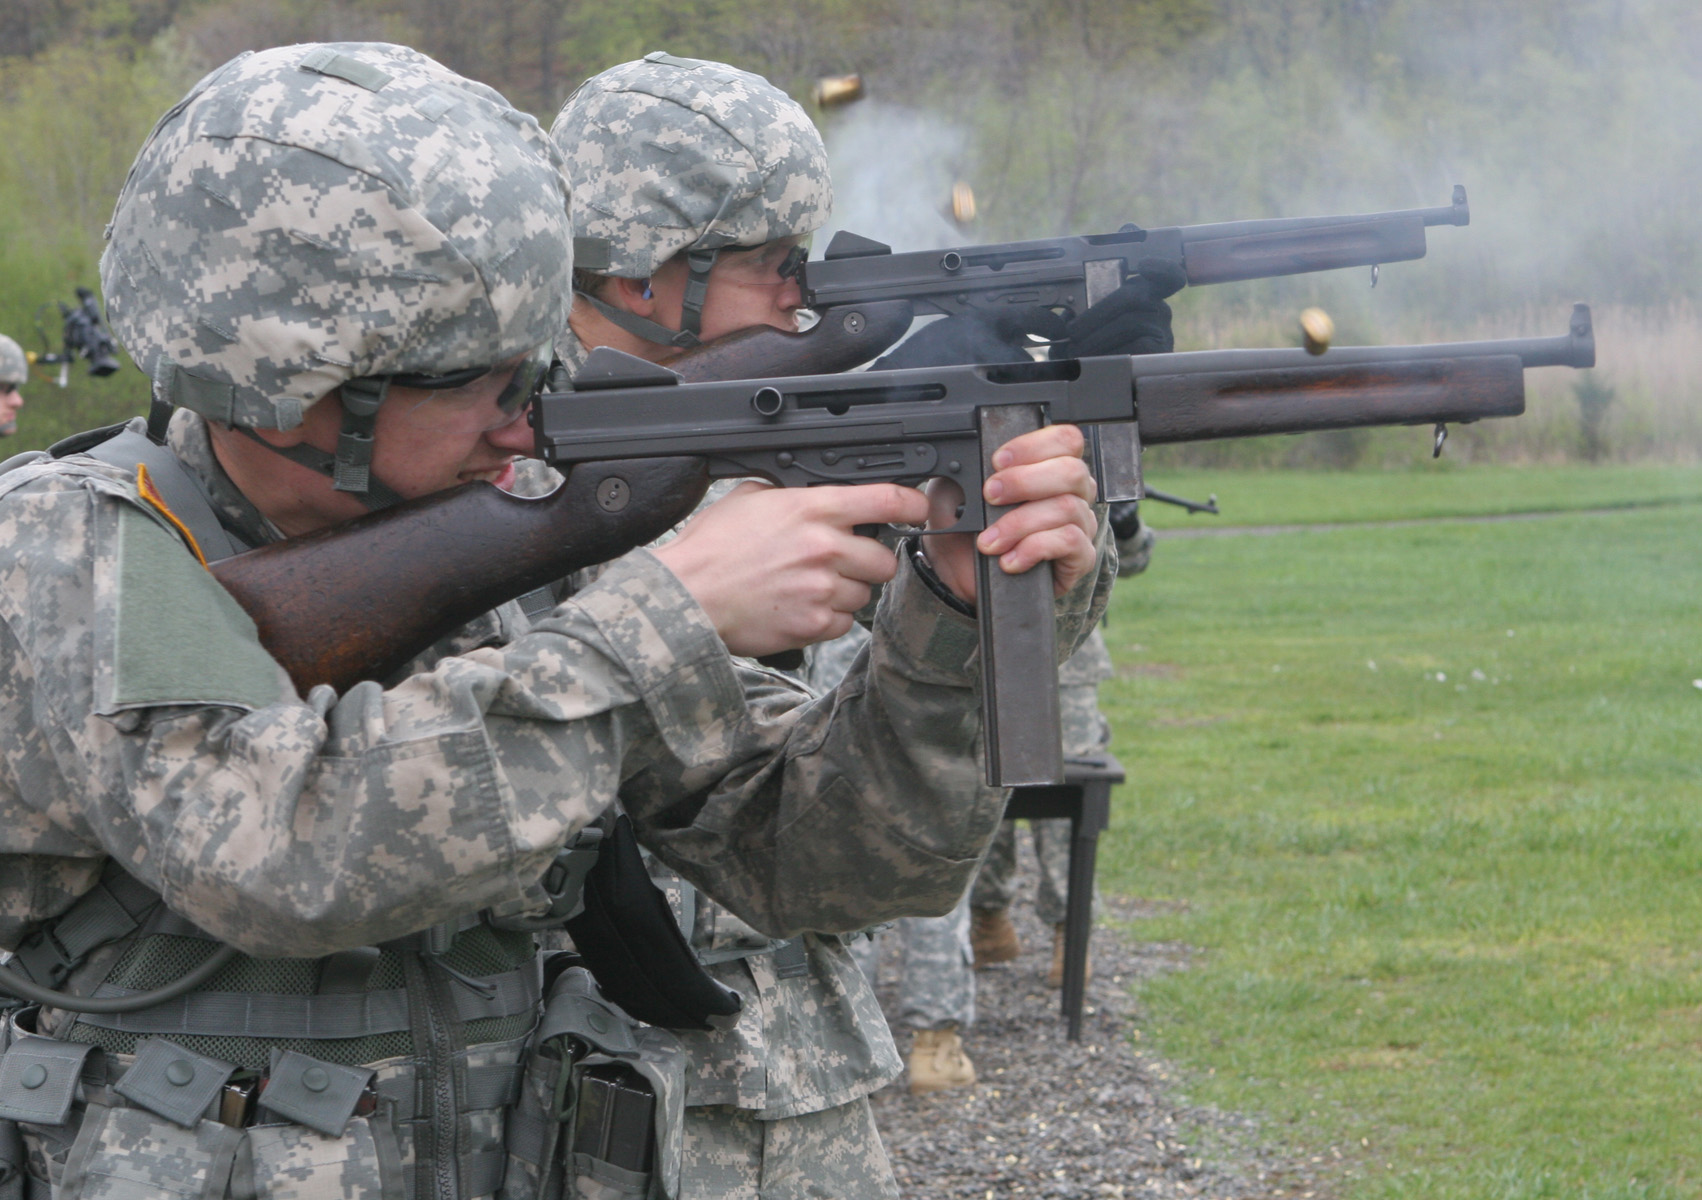 soldiers in uniform aiming guns at targets